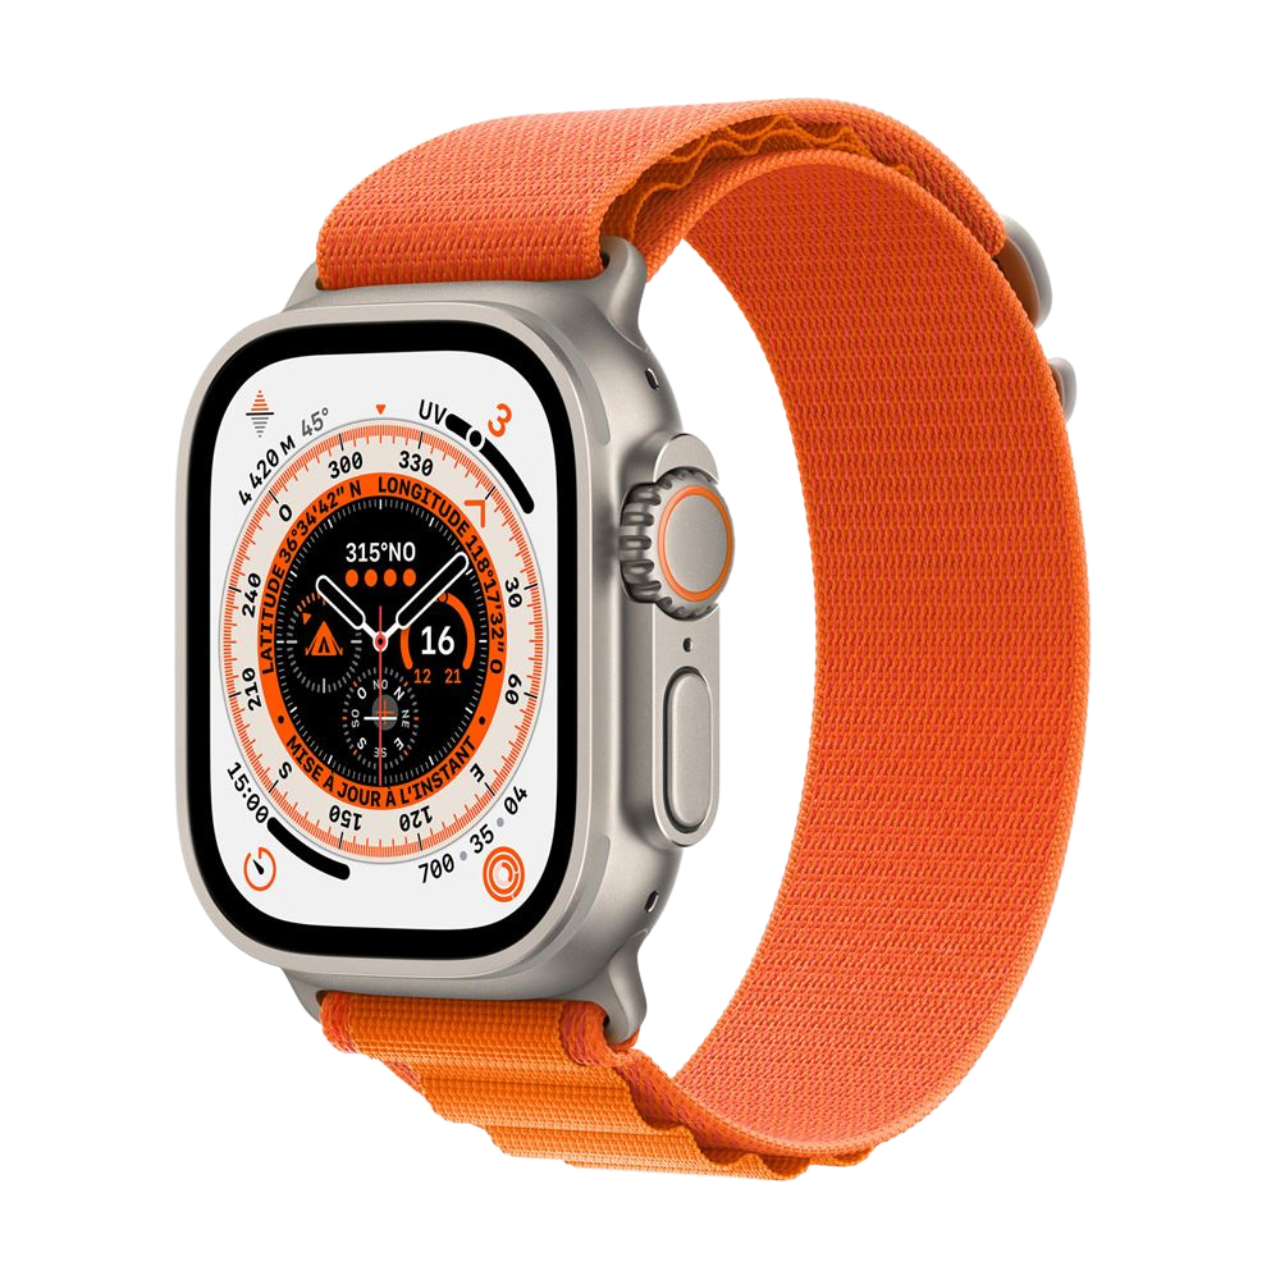 https://images.frandroid.com/wp-content/uploads/2022/09/apple-watch-ultra-frandroid-2022.png